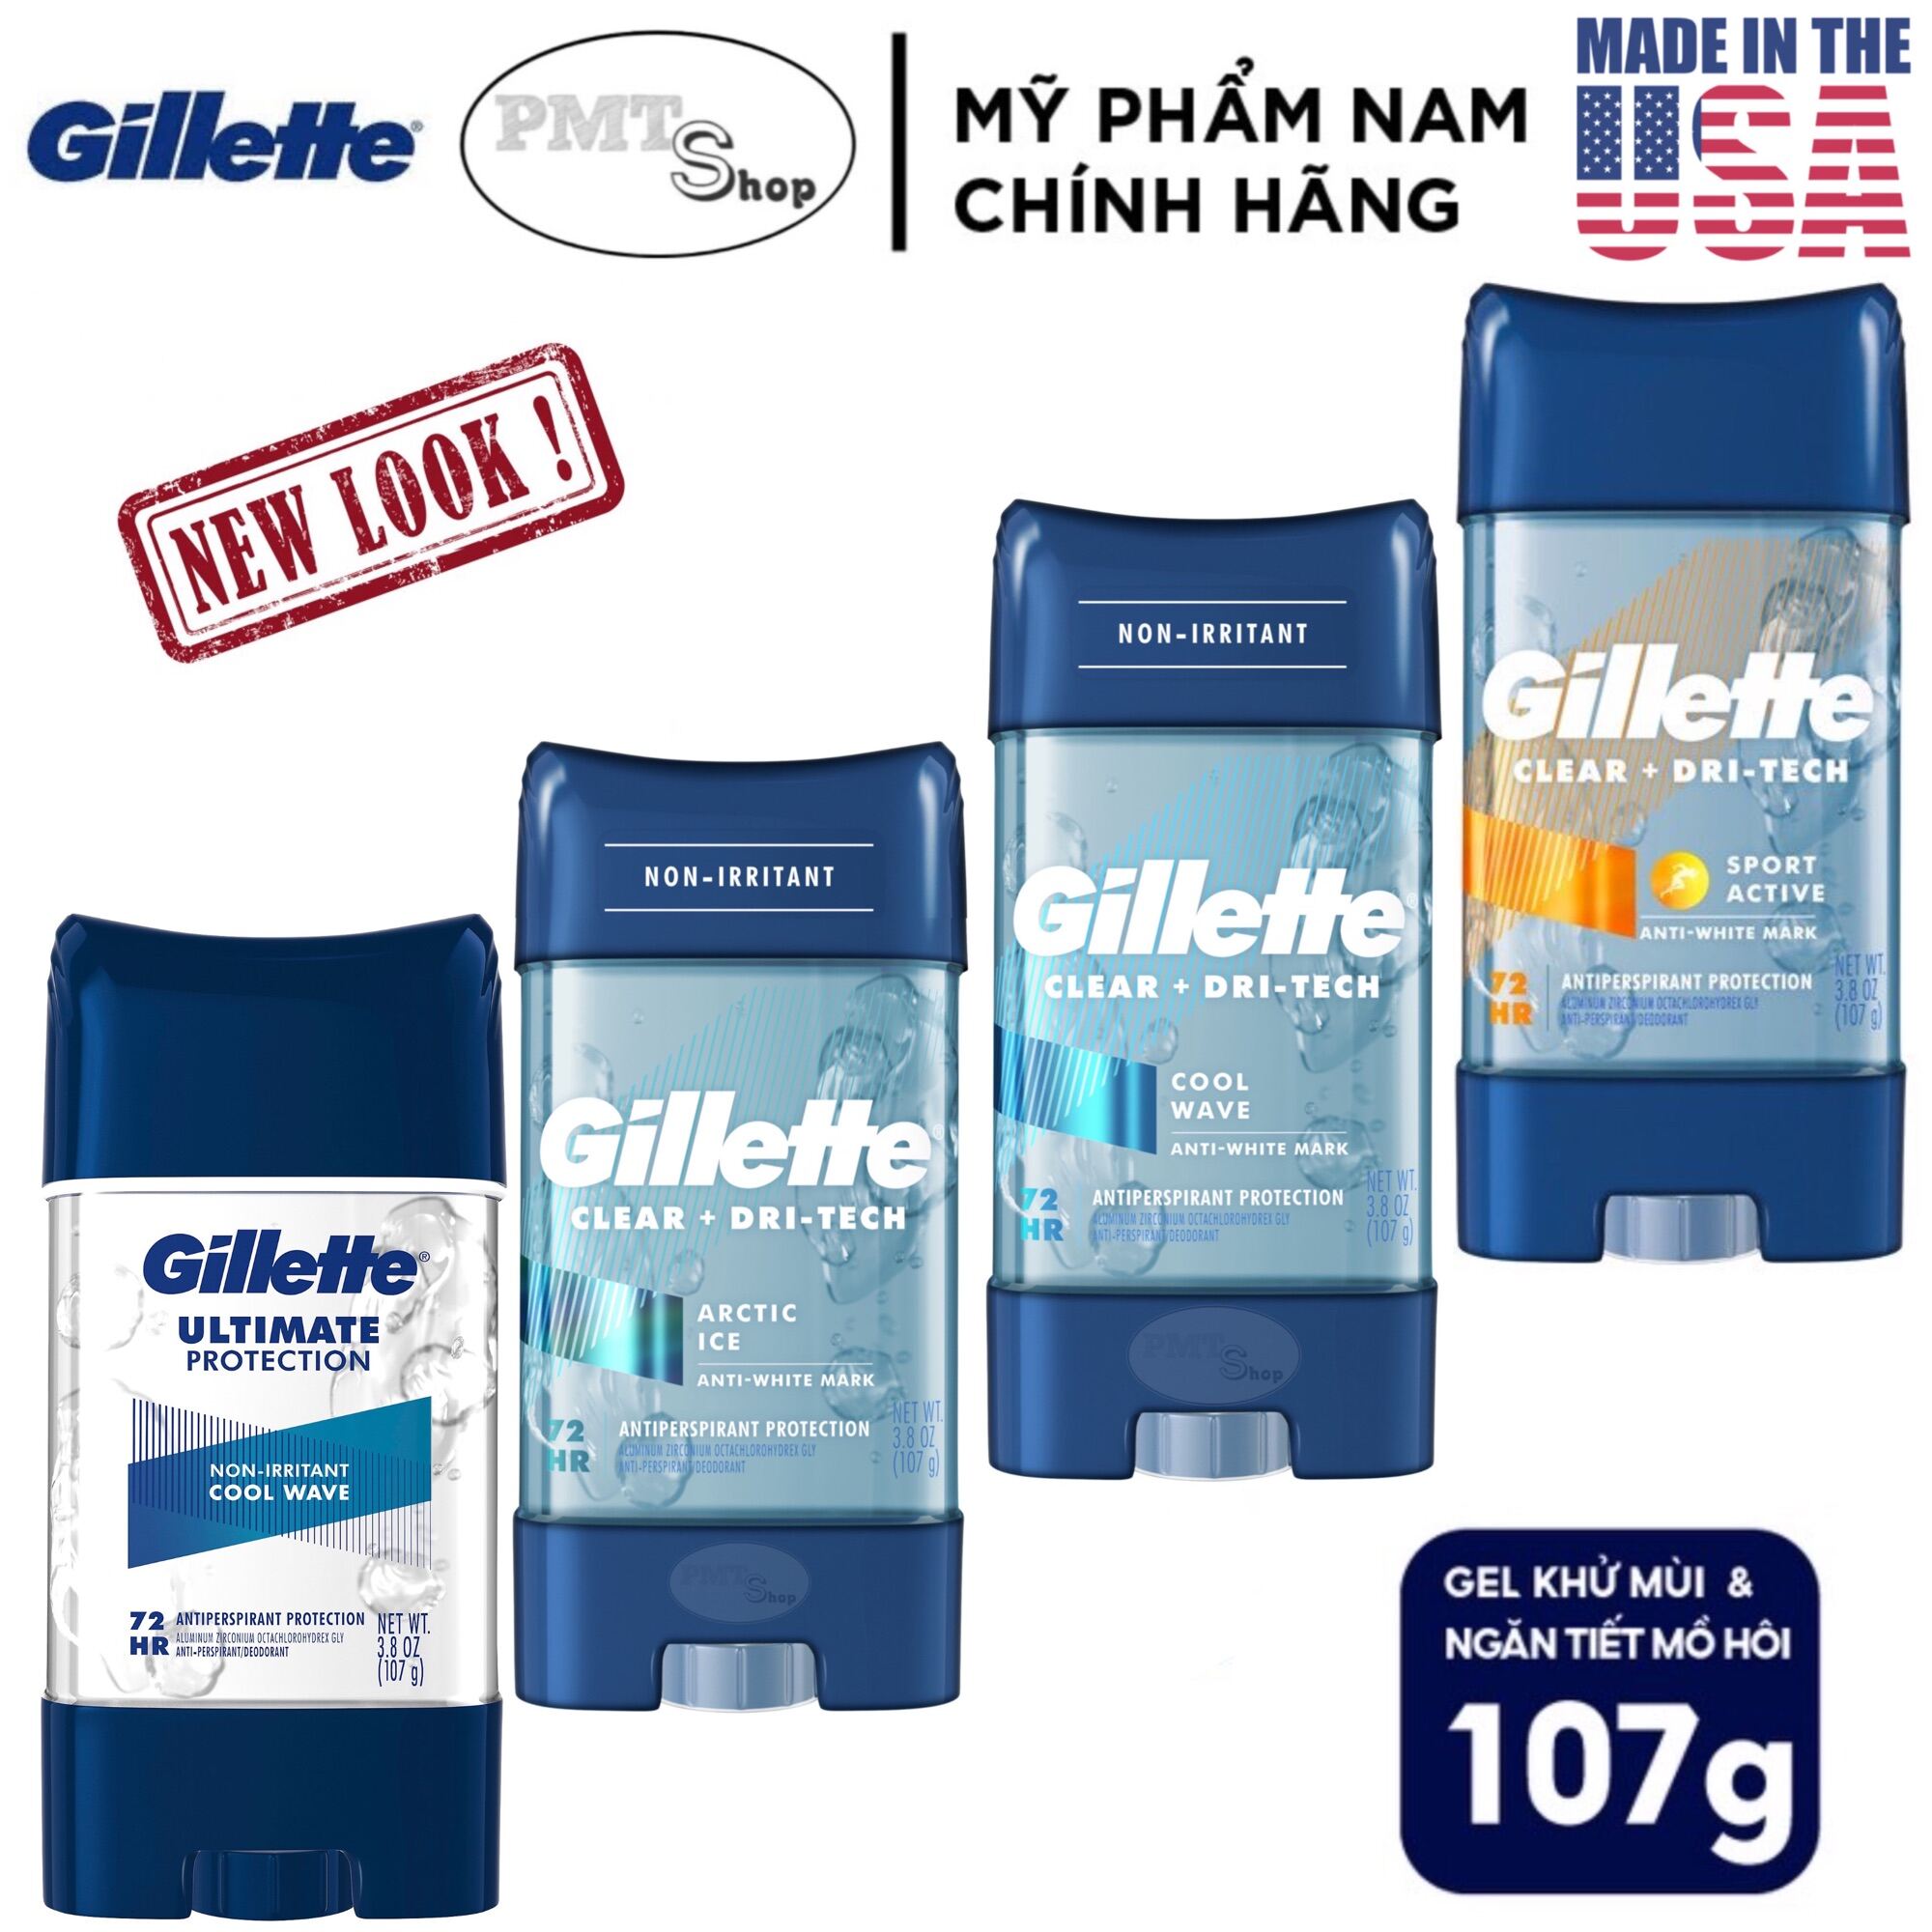 [USA] 1 chai Lăn khử mùi nam Gel Gillette 107g Sport Active, Arctic Ice, Cool Wave 6in1 Ultimate Protection - Mỹ giá rẻ